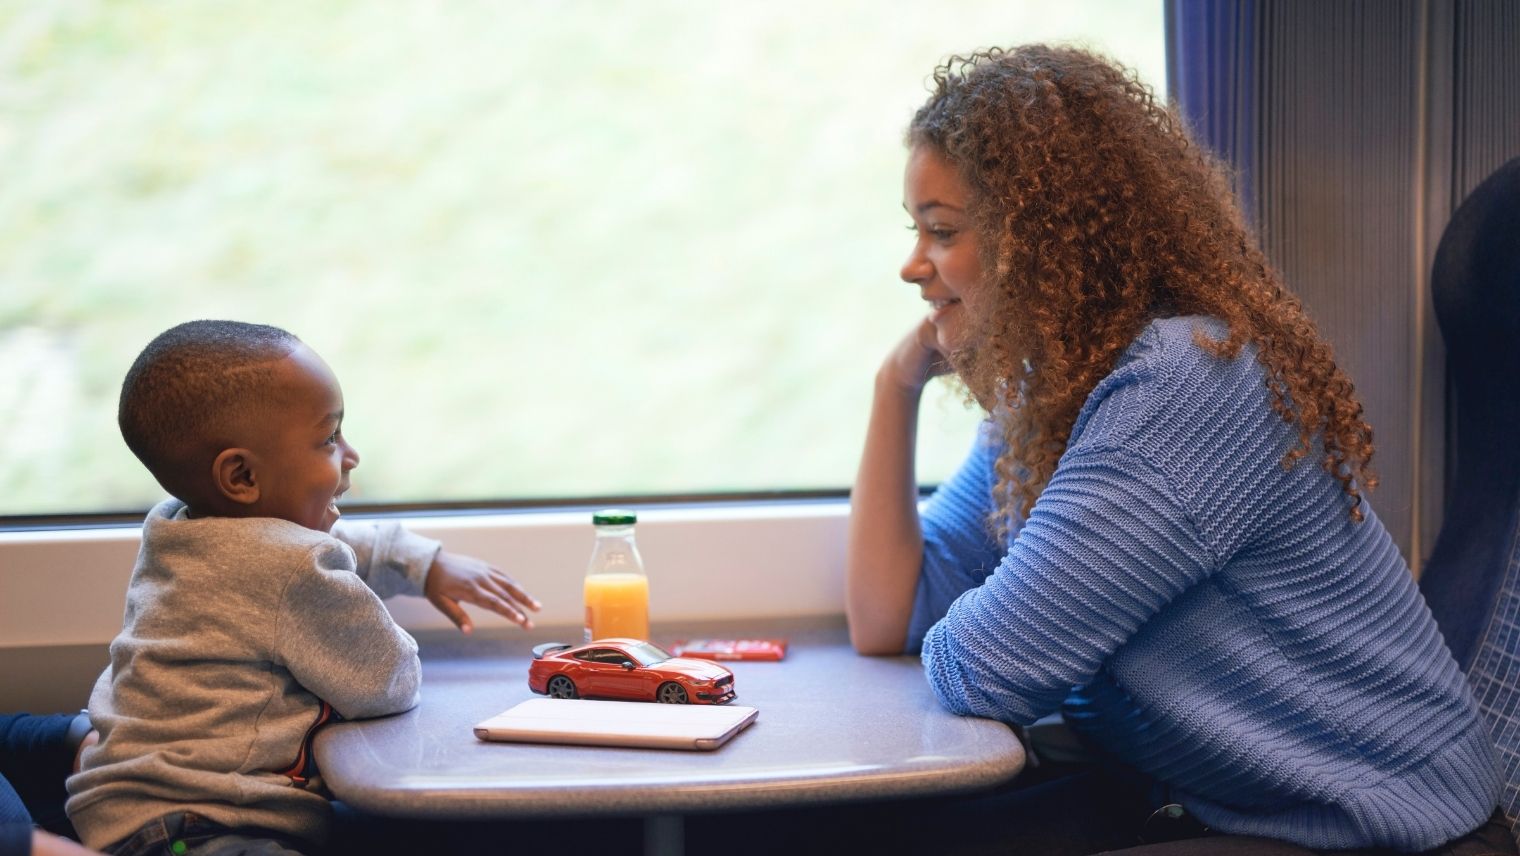 A parent and child in playful conversation on a train